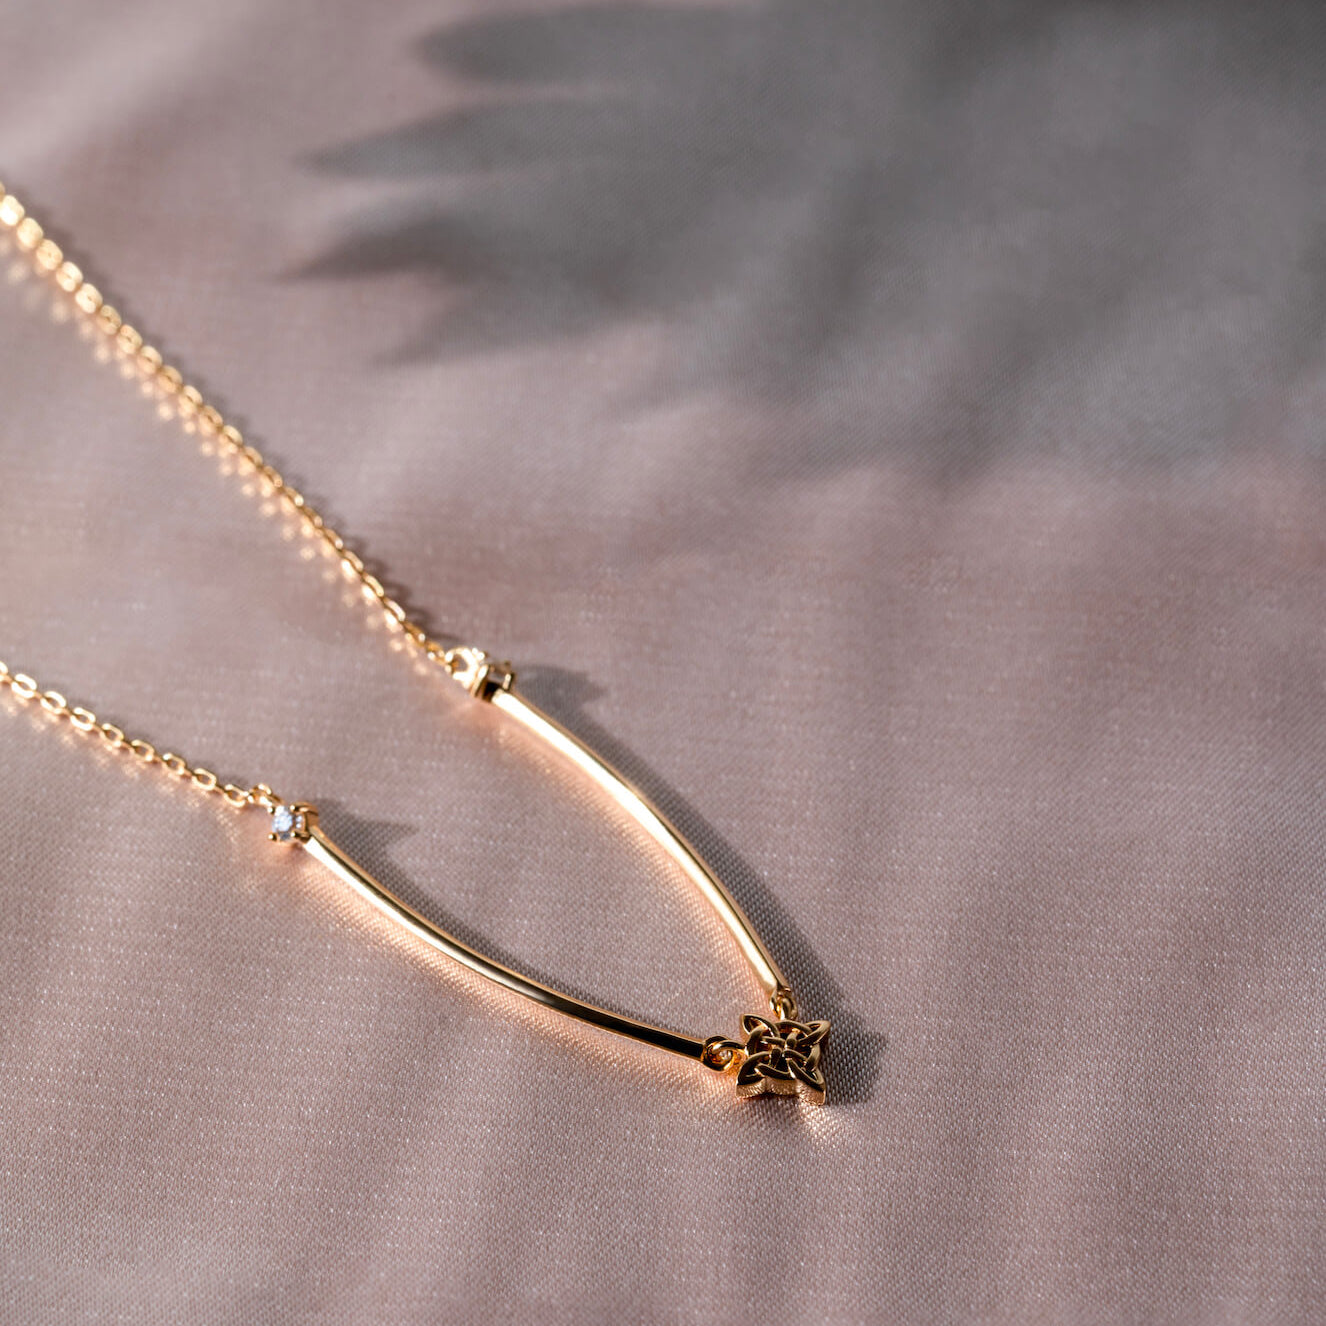 Blessed Be Magick_Witch's Knot Moonstone Necklace in Rose Gold.jpg